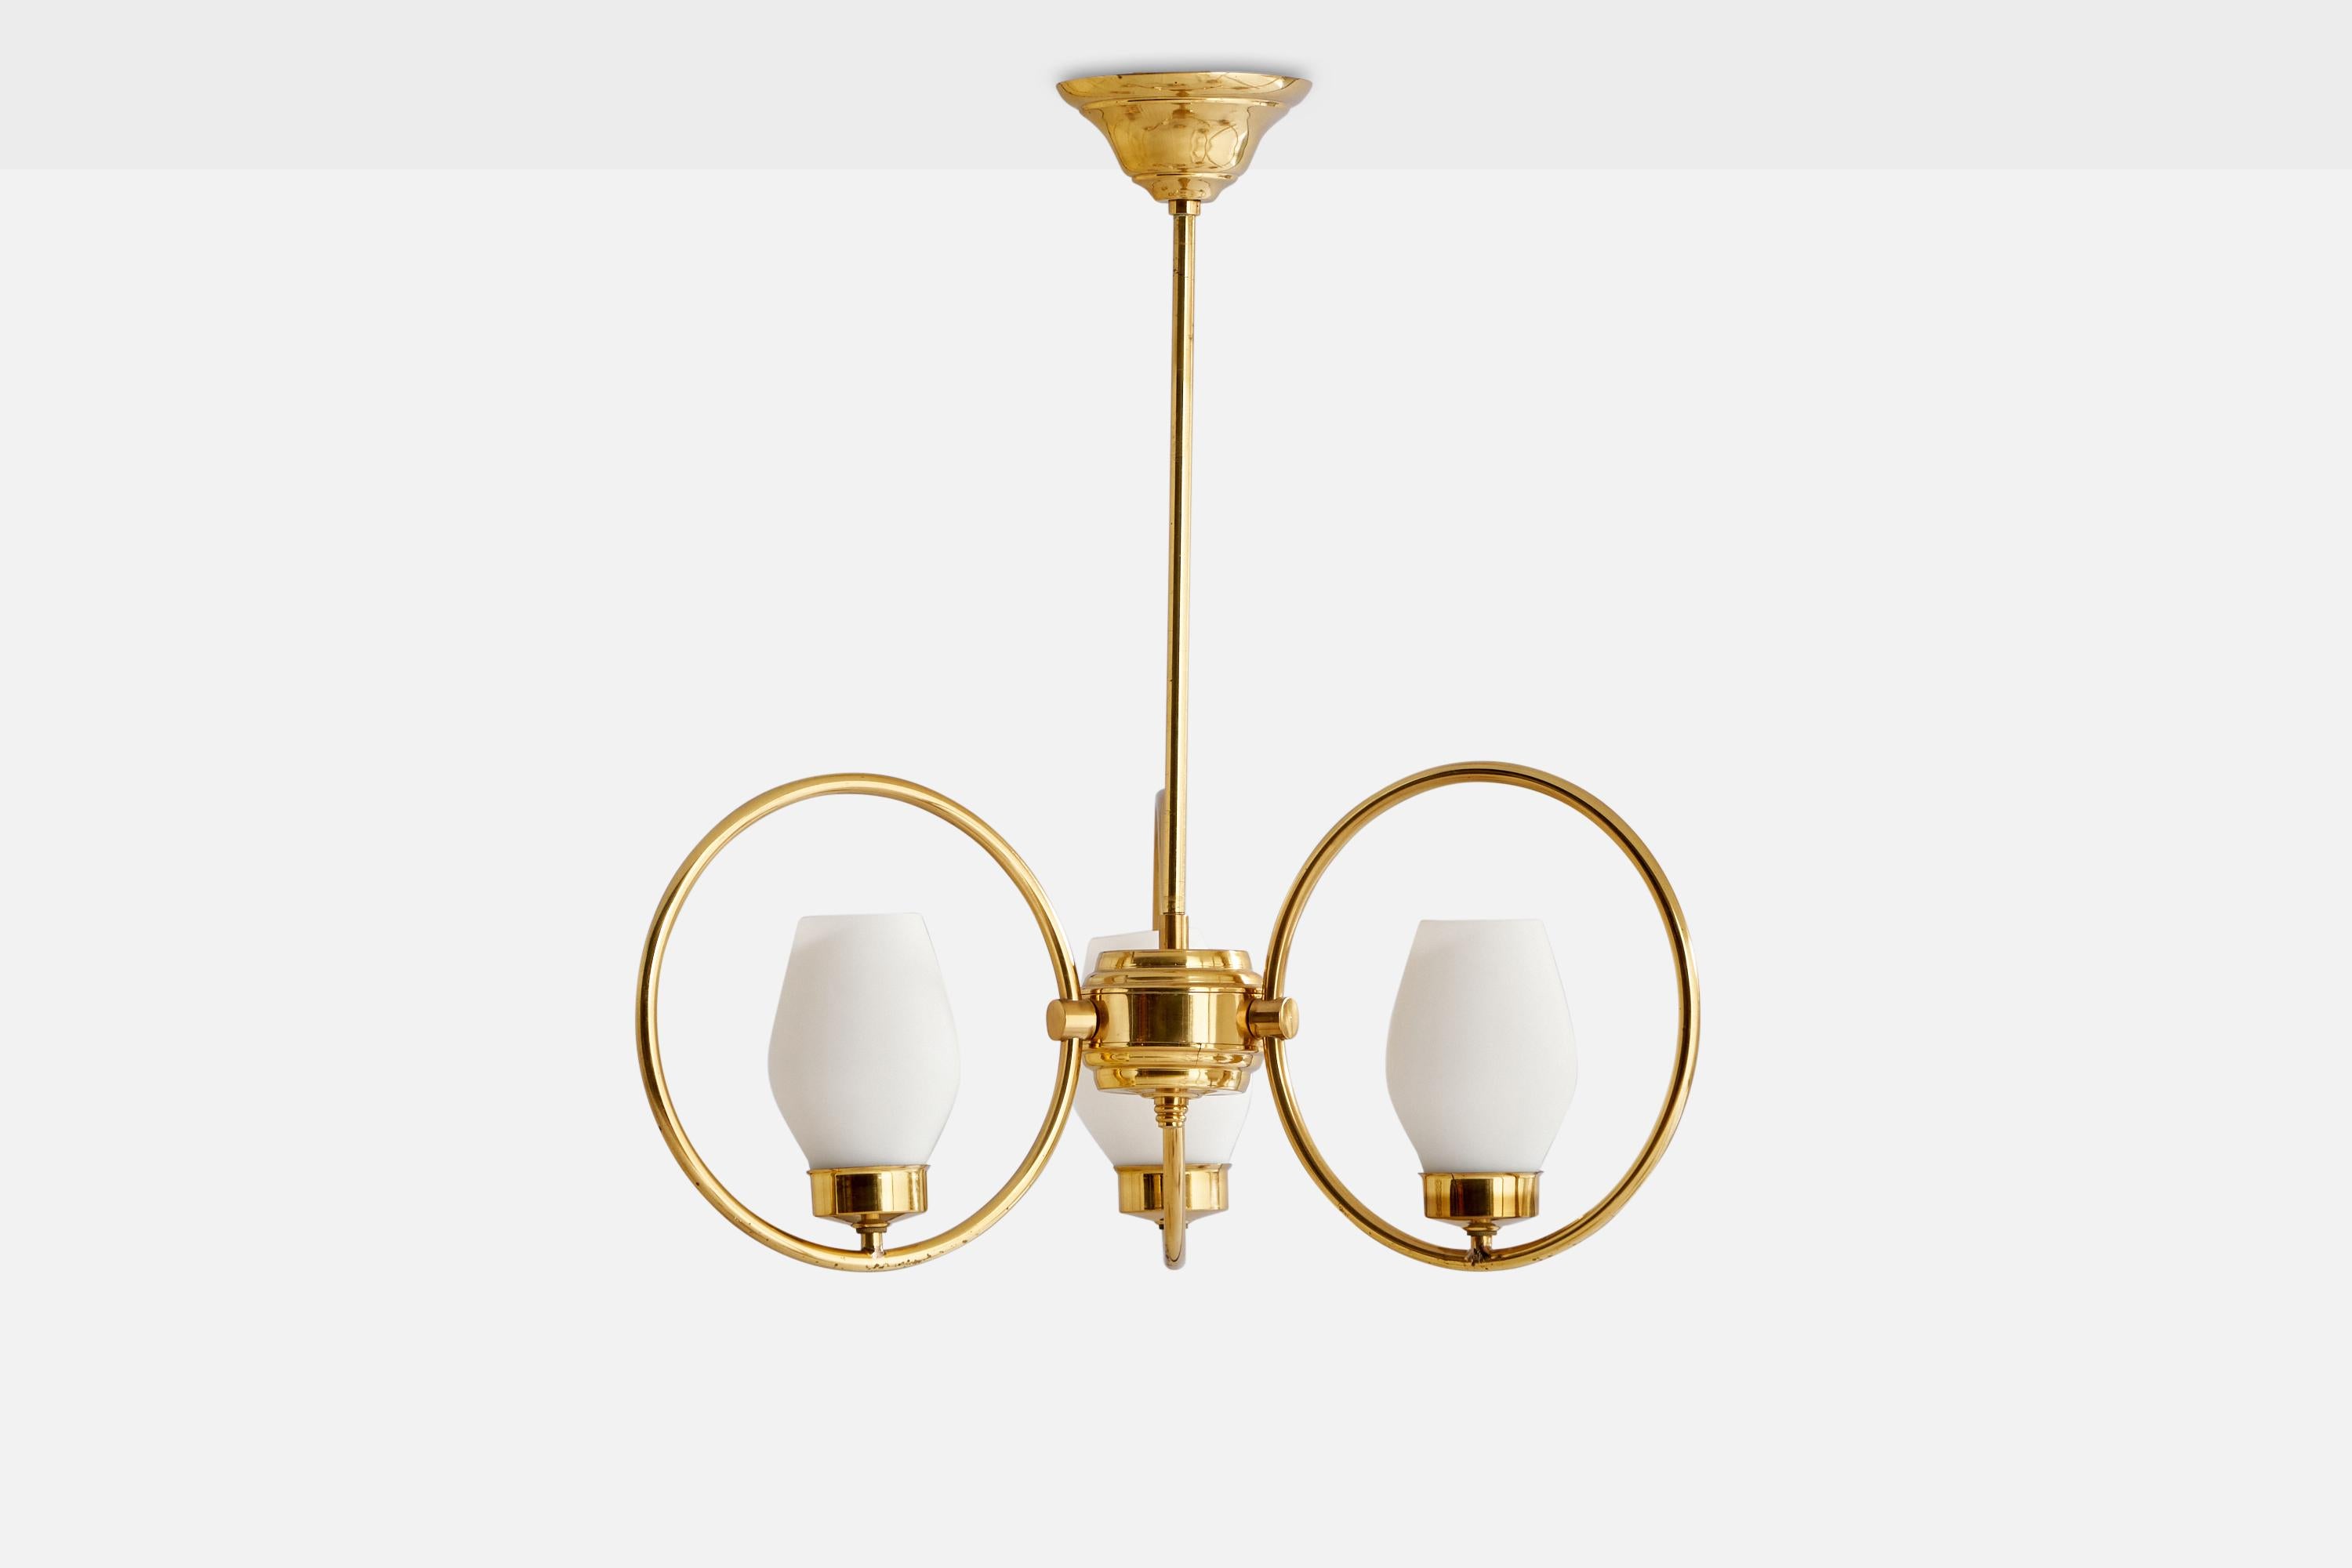 A three-armed brass and opaline glass chandelier designed and produced in Sweden, c. 1950s.

Dimensions of canopy (inches): 2.14” H x 4.4” Diameter
Socket takes standard E-14 bulbs. 3 sockets.There is no maximum wattage stated on the fixture. All